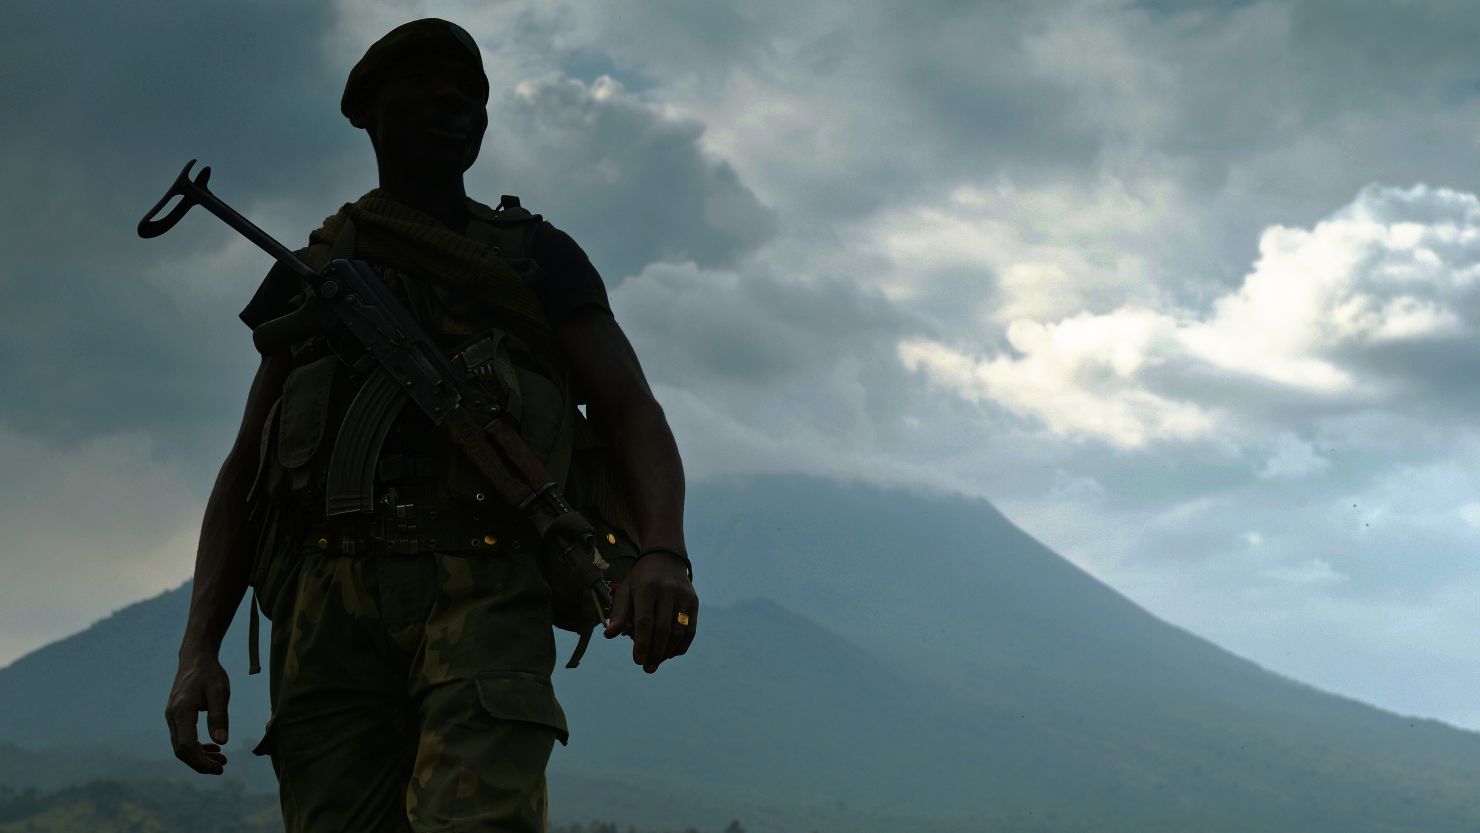 A soldier from the Democratic Republic of Congo army stands guard last month in Kibati near Goma -- an area known for clashes between Congolese forces and M23 rebels.